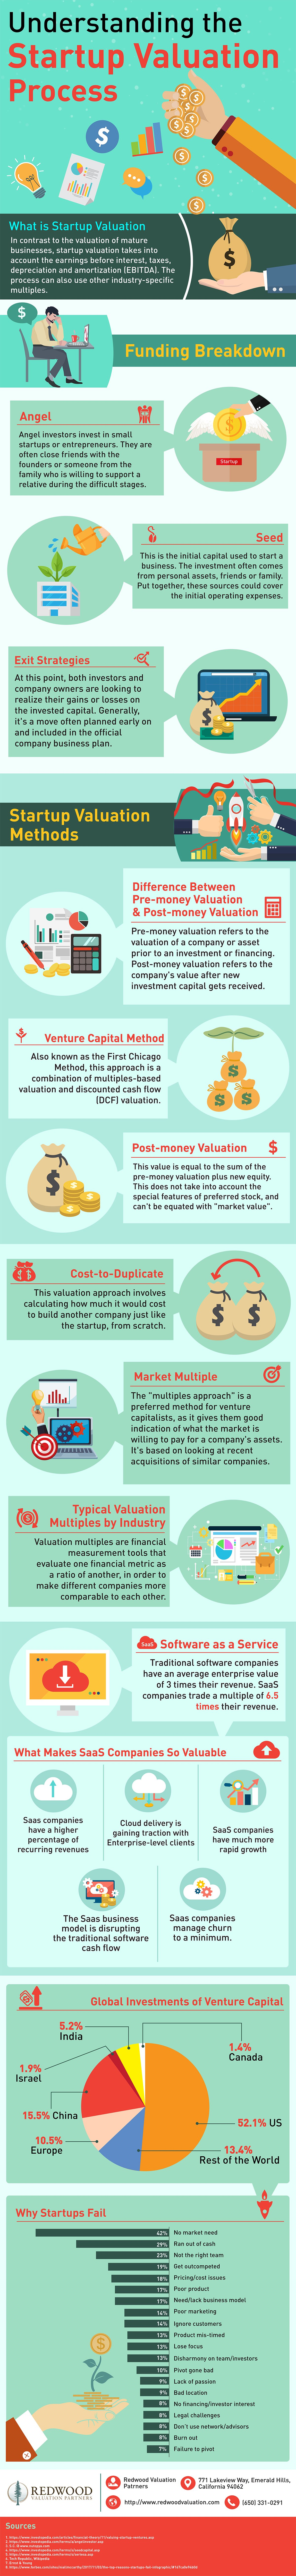 Startup Valuation Process